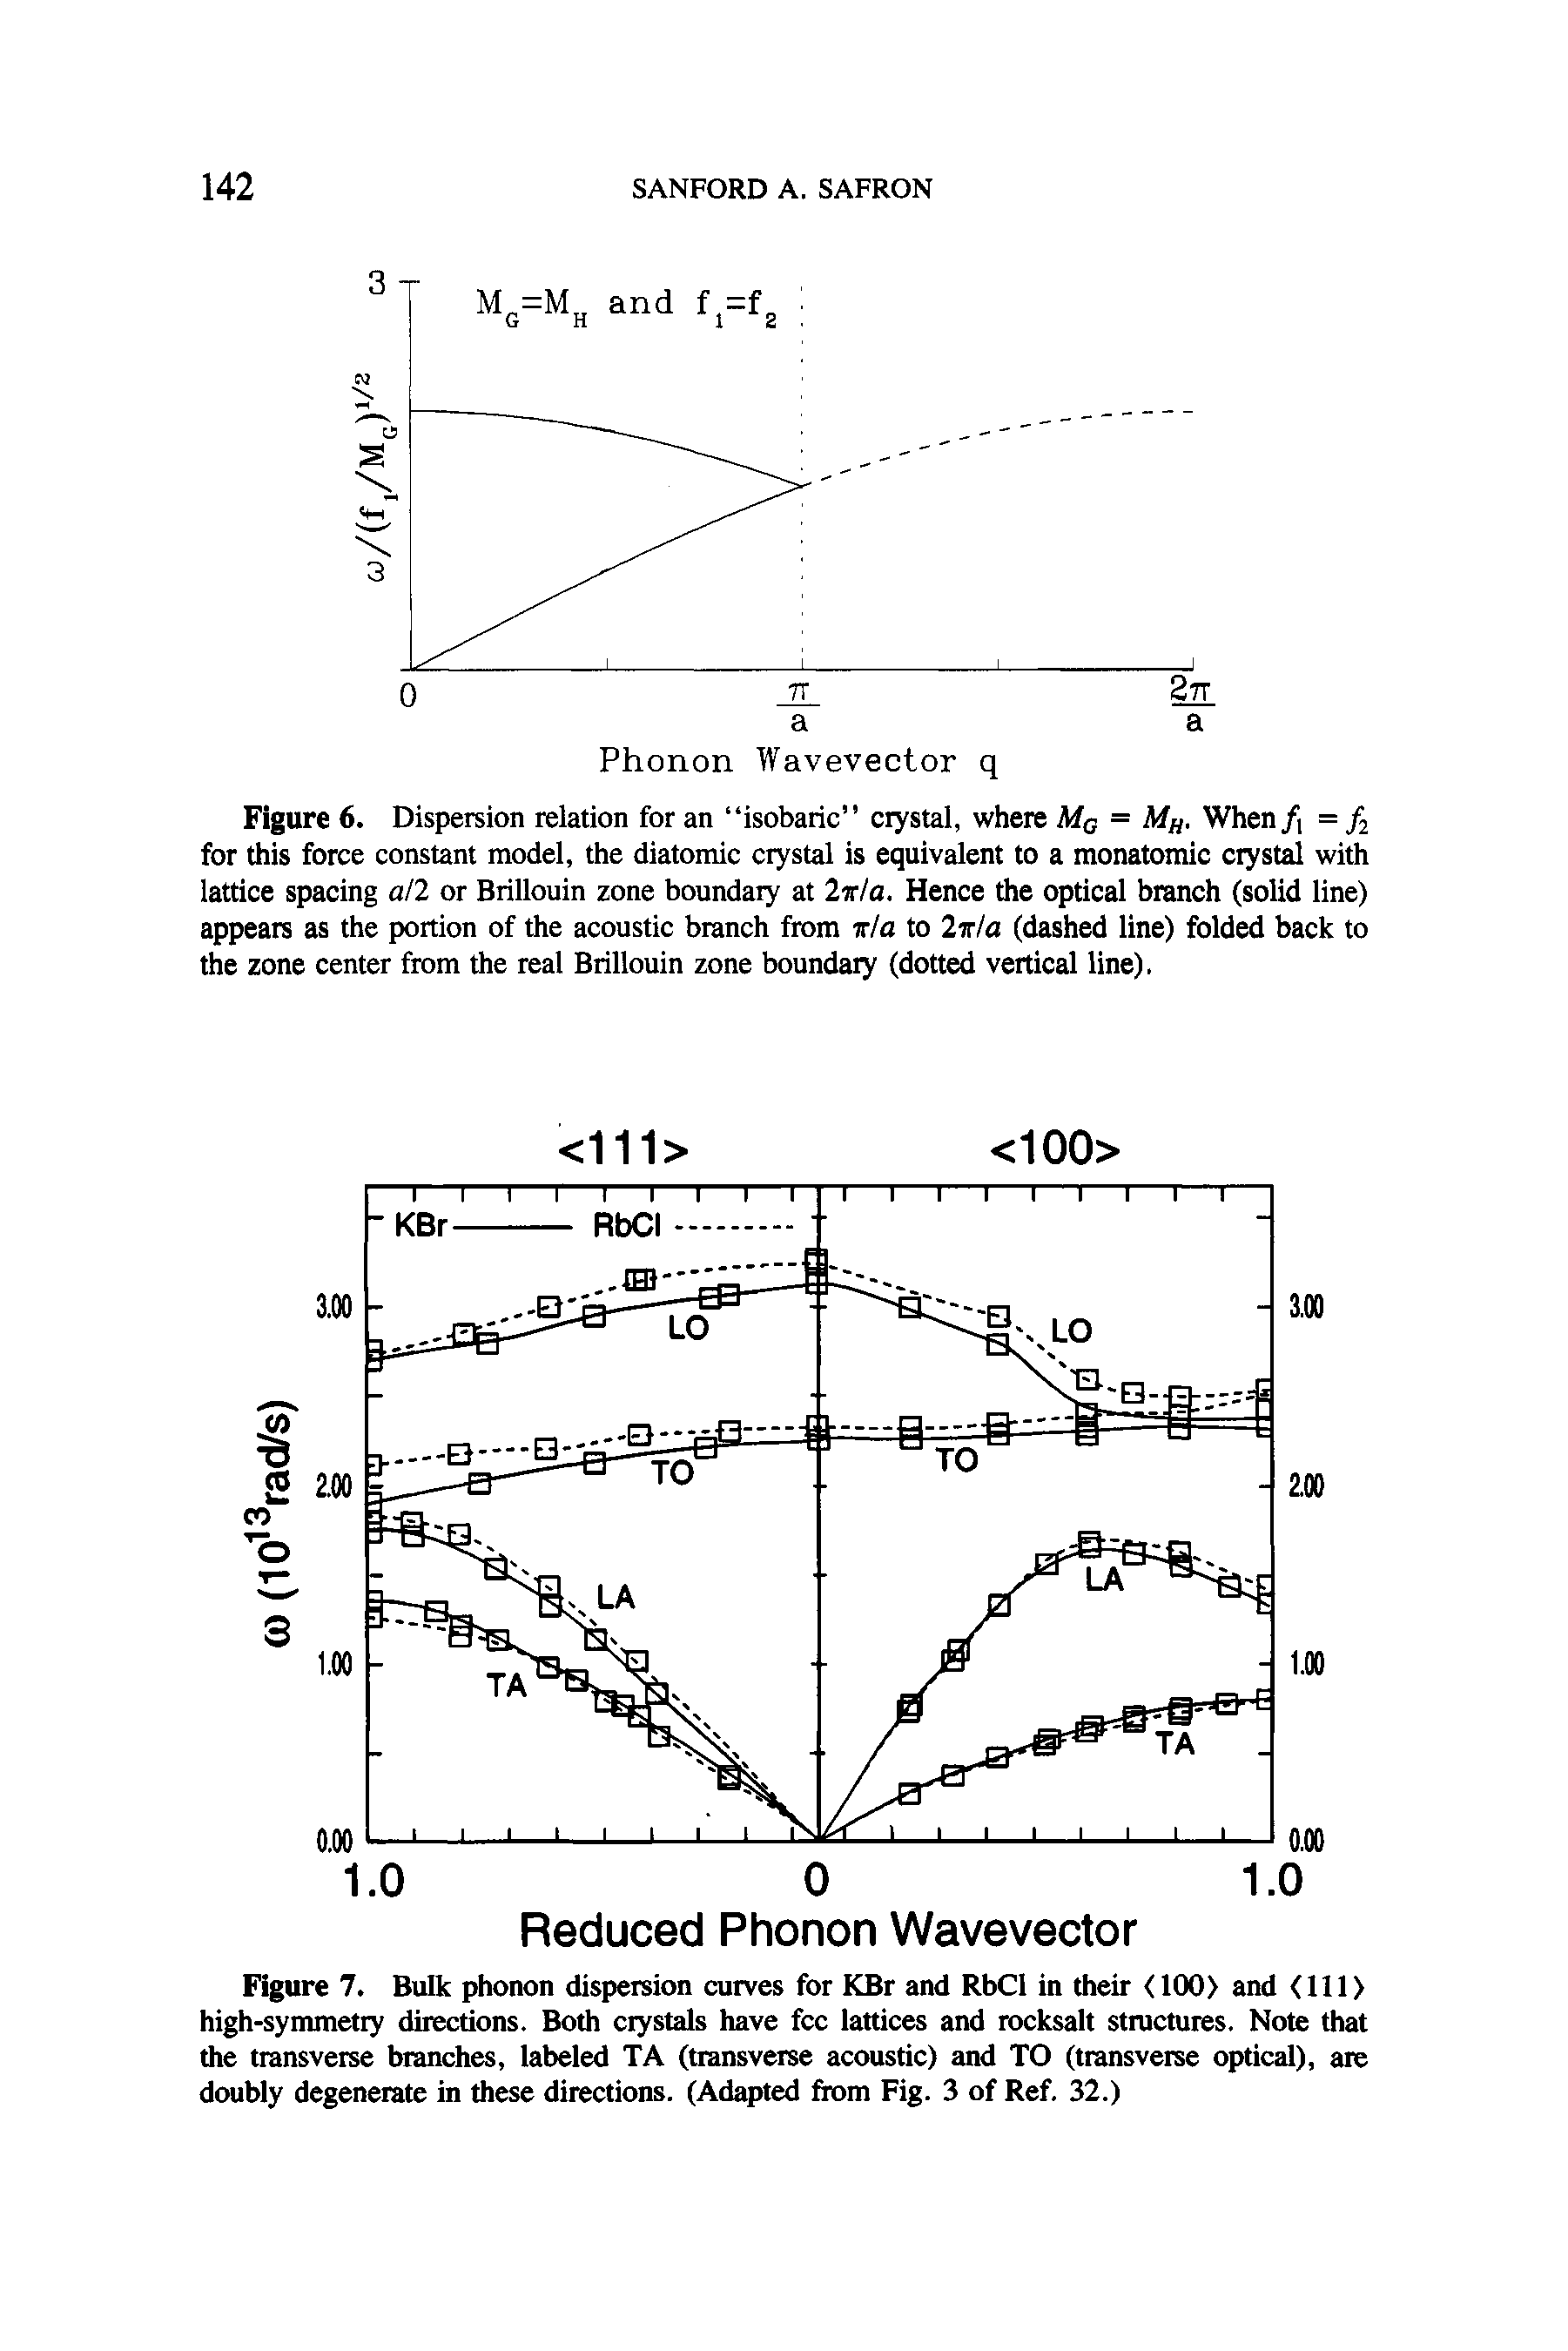 Figure 7. Bulk phonon dispersion curves for KBr and RbCl in their <100> and <111> high-symmetry directions. Both crystals have fee lattices and rocksalt structures. Note that the transverse branches, labeled TA (transverse acoustic) and TO (transverse optical), are doubly degenerate in these directions. (Adapted from Fig. 3 of Ref. 32.)...